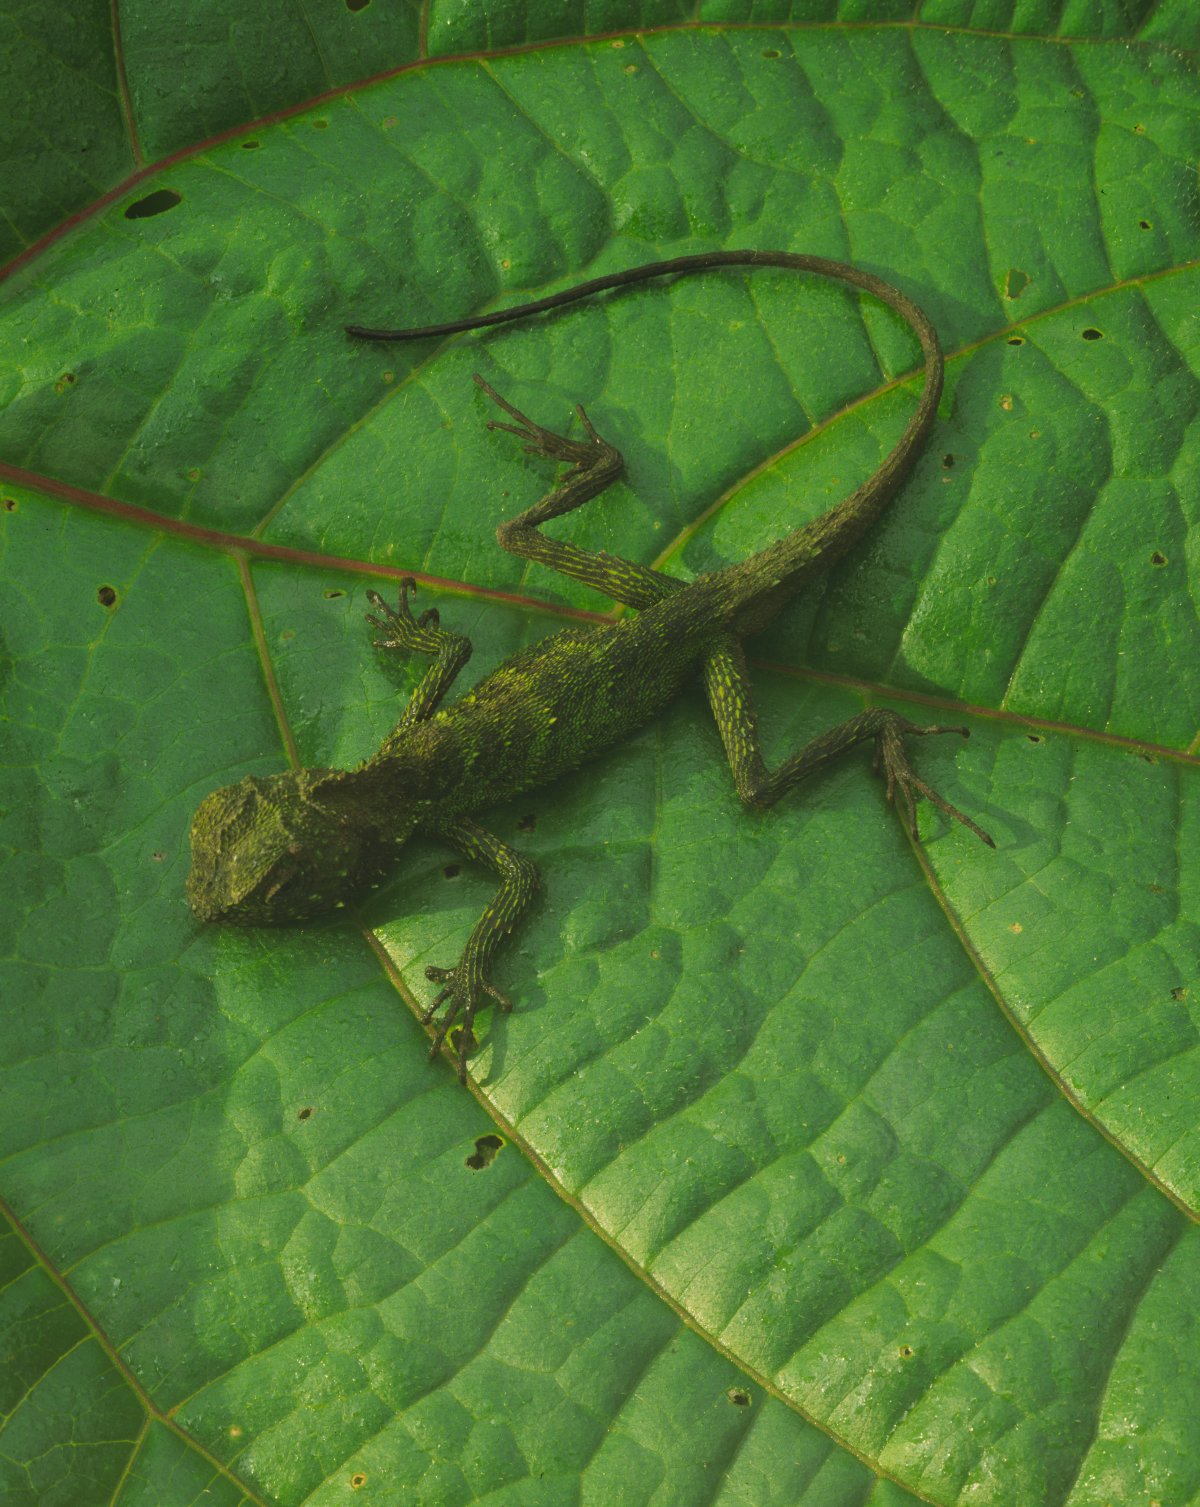 A small green lizard sits on a green leave. The lizard is slightly darker green than the leaf but it still hard to see